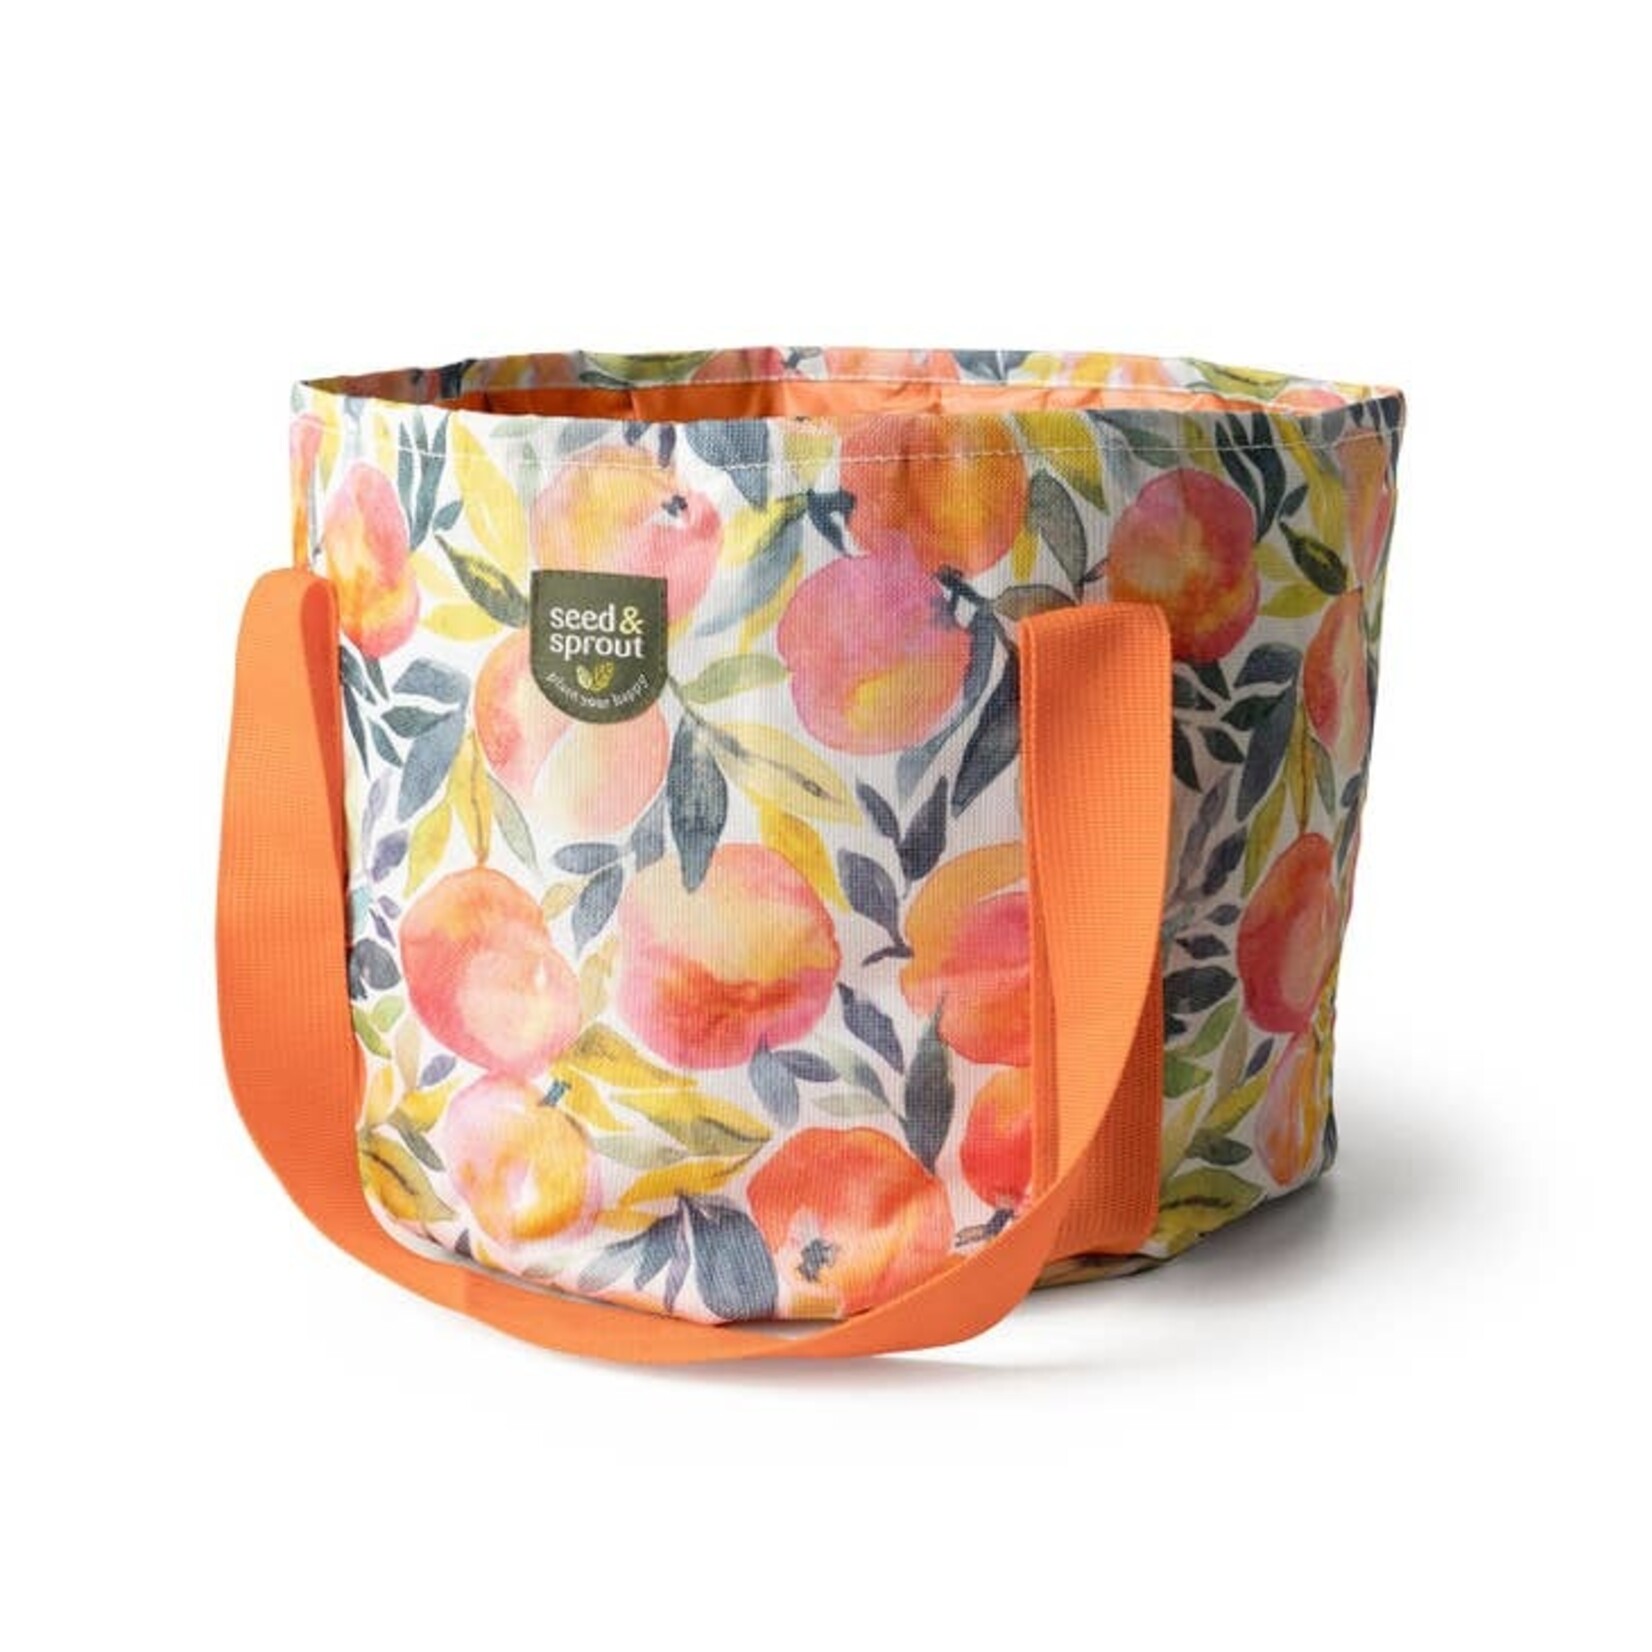 DMerch Seed & Sprout Foldable Garden Bucket